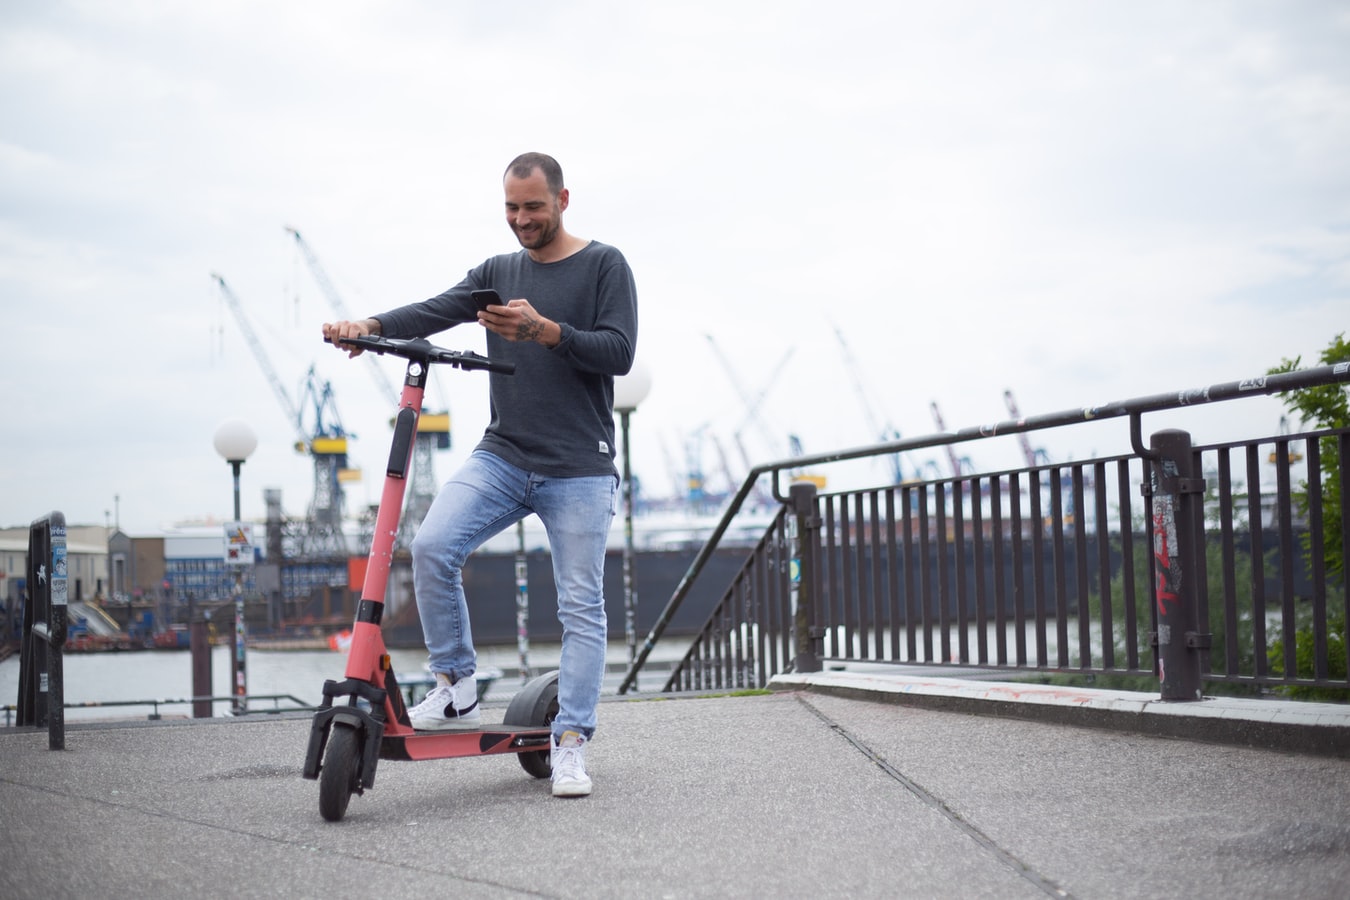 5 E-Scooters Laws In UK